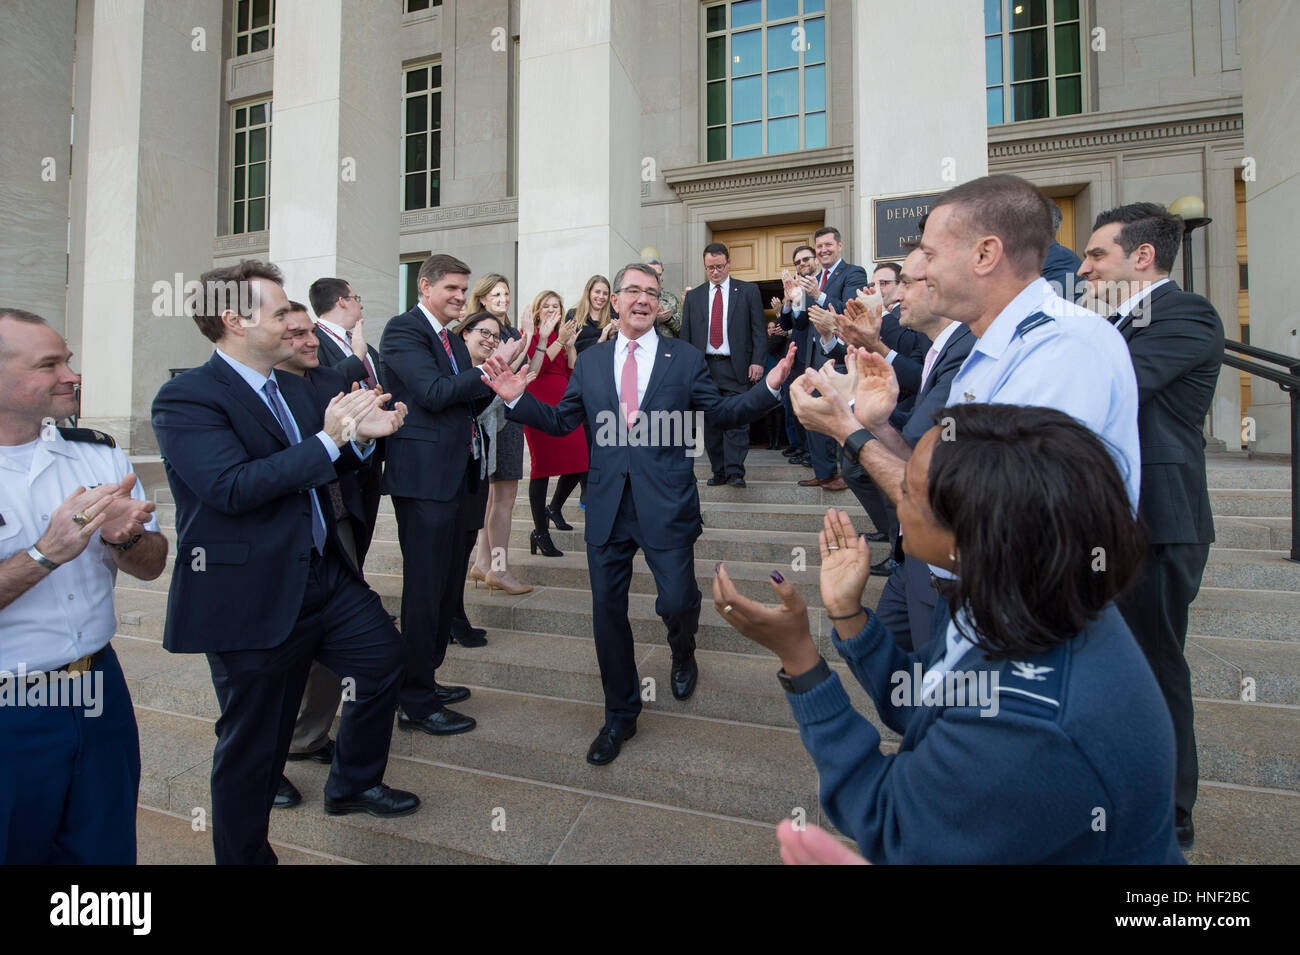 U.S. Department of Defense staff applaud as Secretary of Defense Ashton Carter leaves the Pentagon on his last day in office January 19, 2017 in Washington, DC. Stock Photo